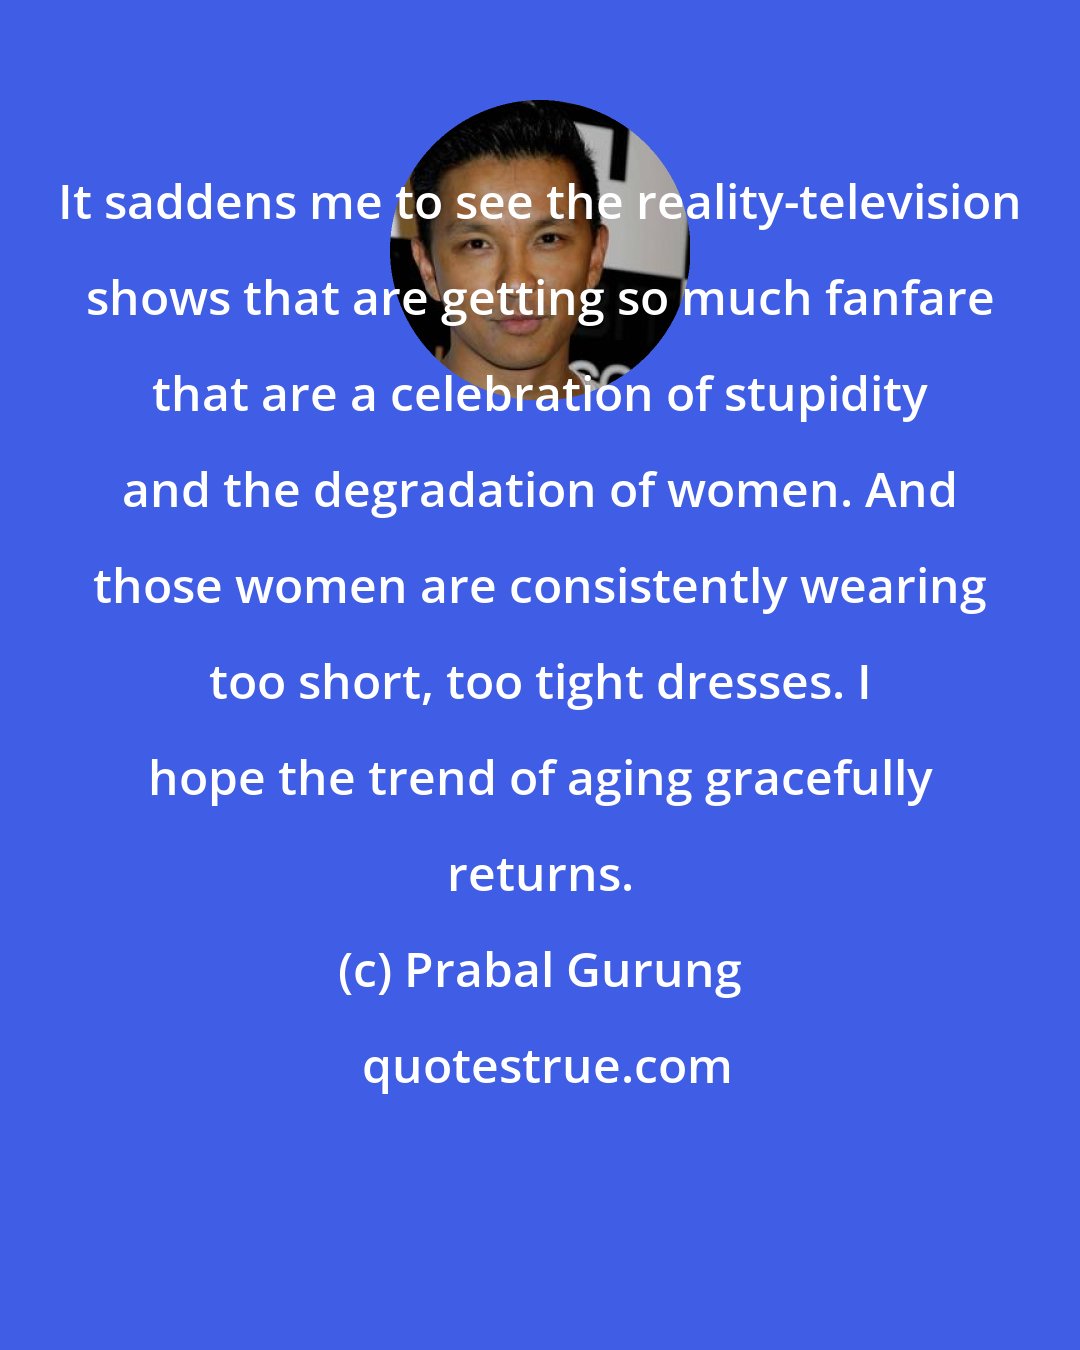 Prabal Gurung: It saddens me to see the reality-television shows that are getting so much fanfare that are a celebration of stupidity and the degradation of women. And those women are consistently wearing too short, too tight dresses. I hope the trend of aging gracefully returns.